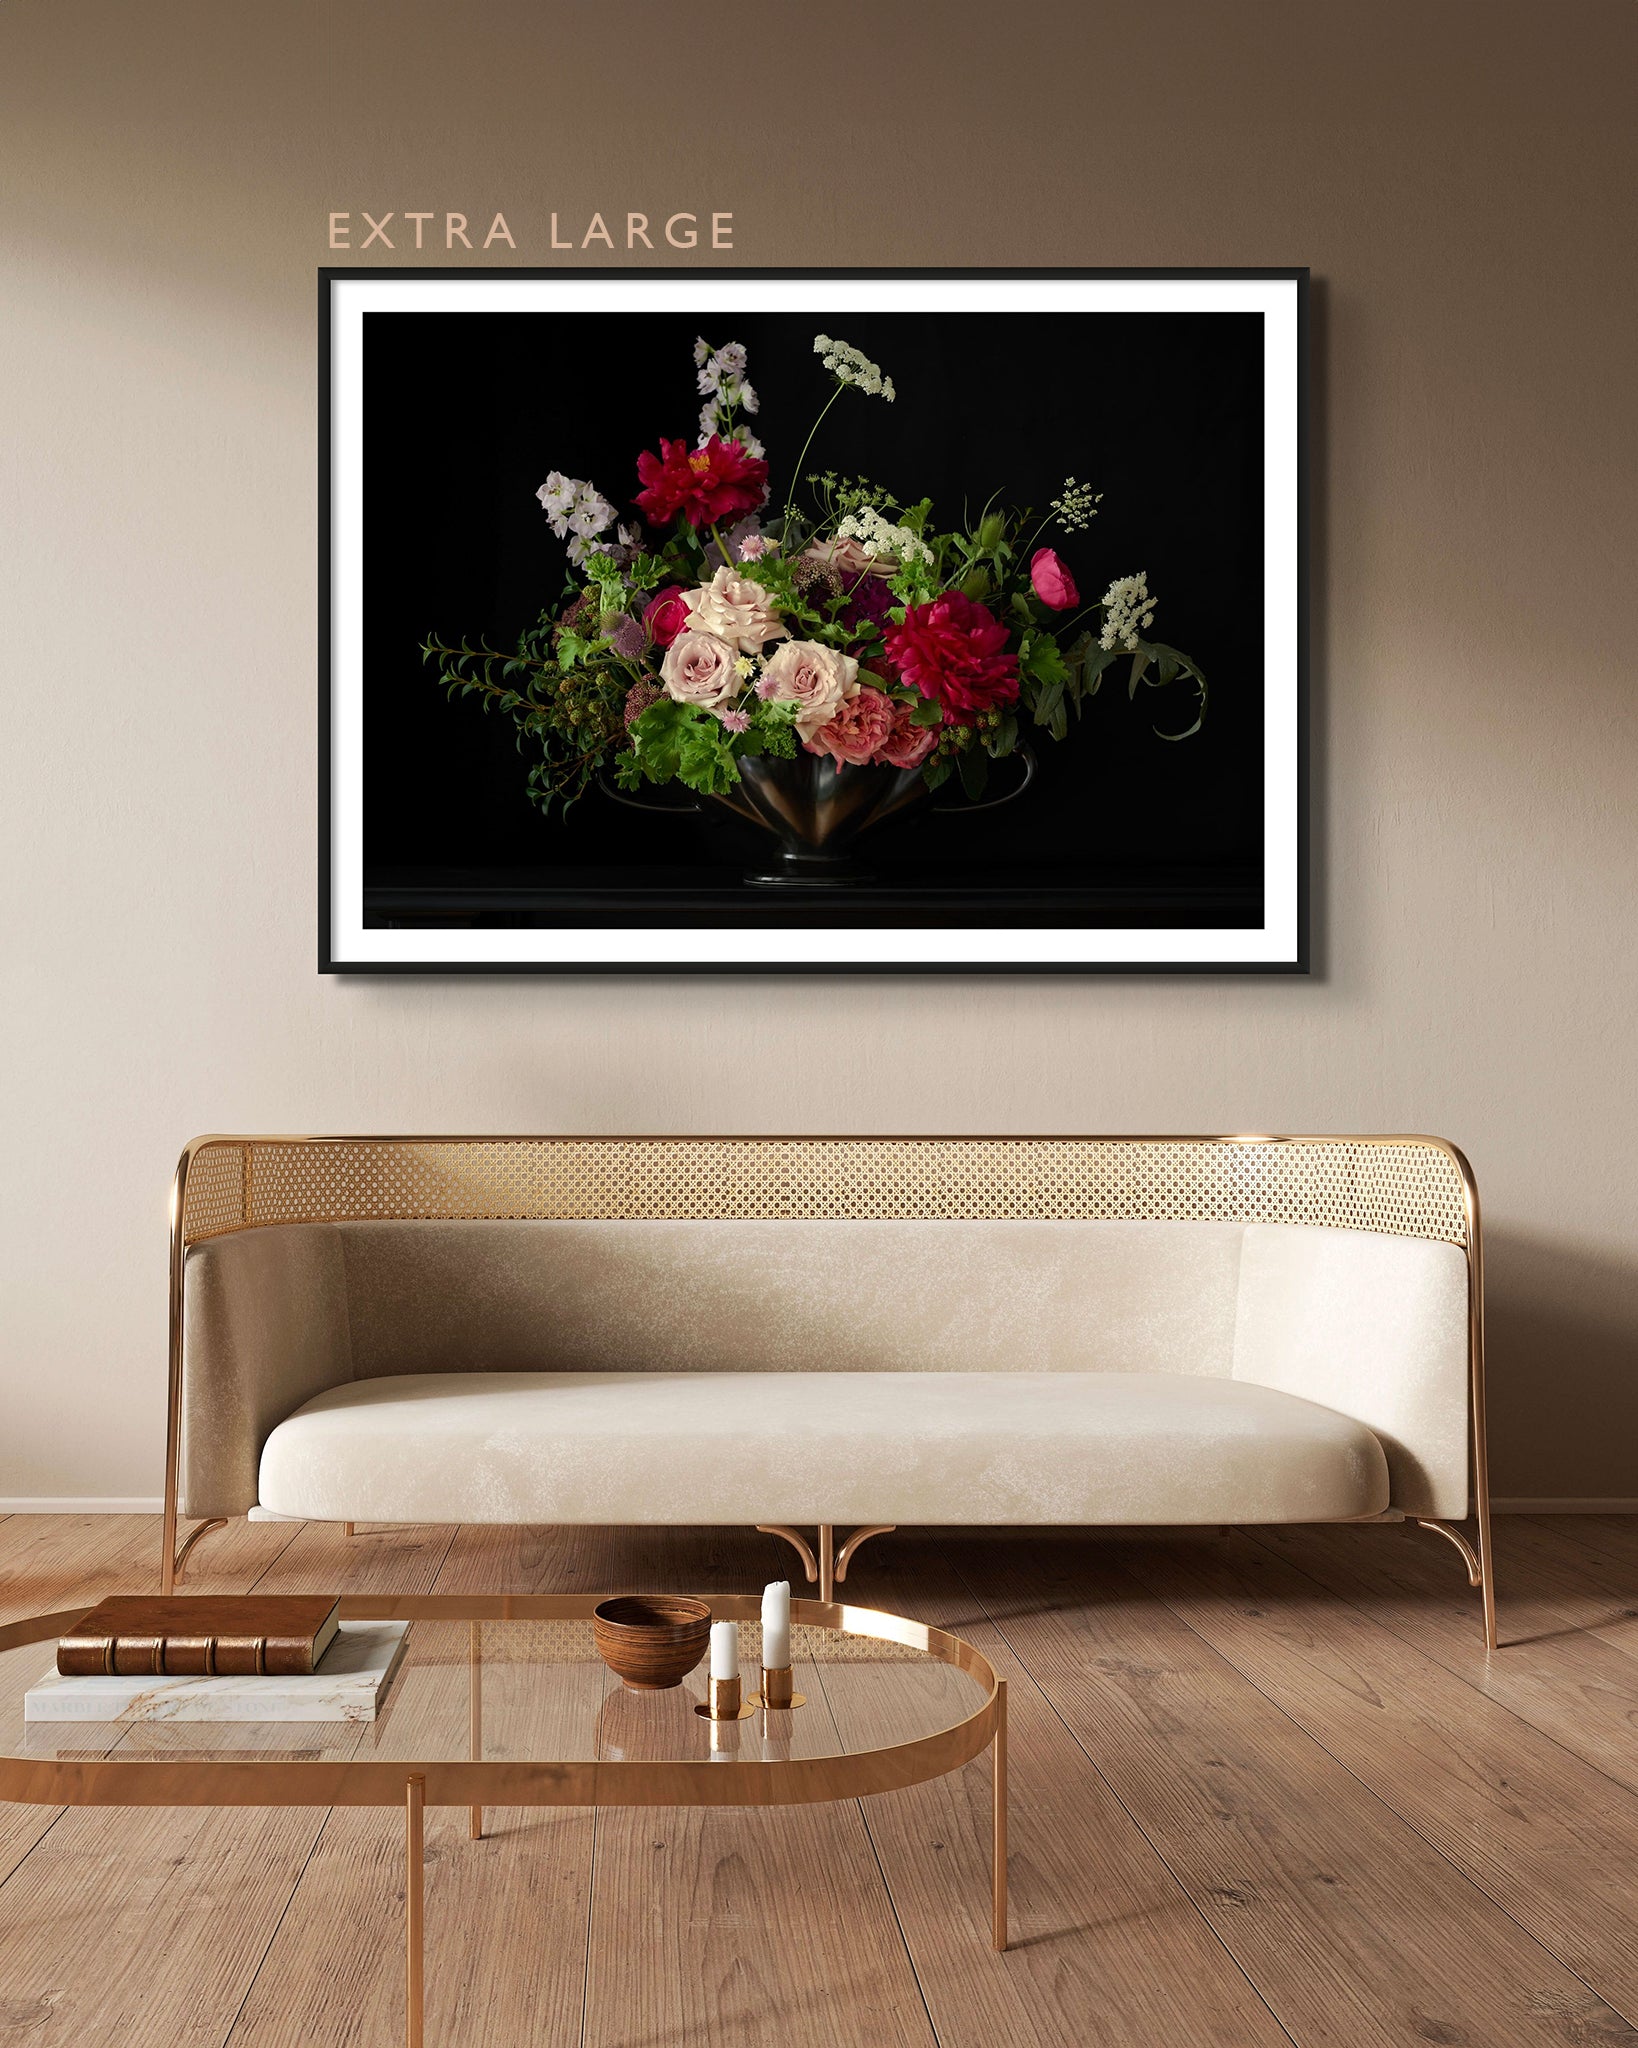 Limited Edition 'BETSY' Framed Photographic Print Shown in Extra Large Size, Displayed In A Warm Muted Sitting Room Hung Above a Sophisticated Velvet Sofa.